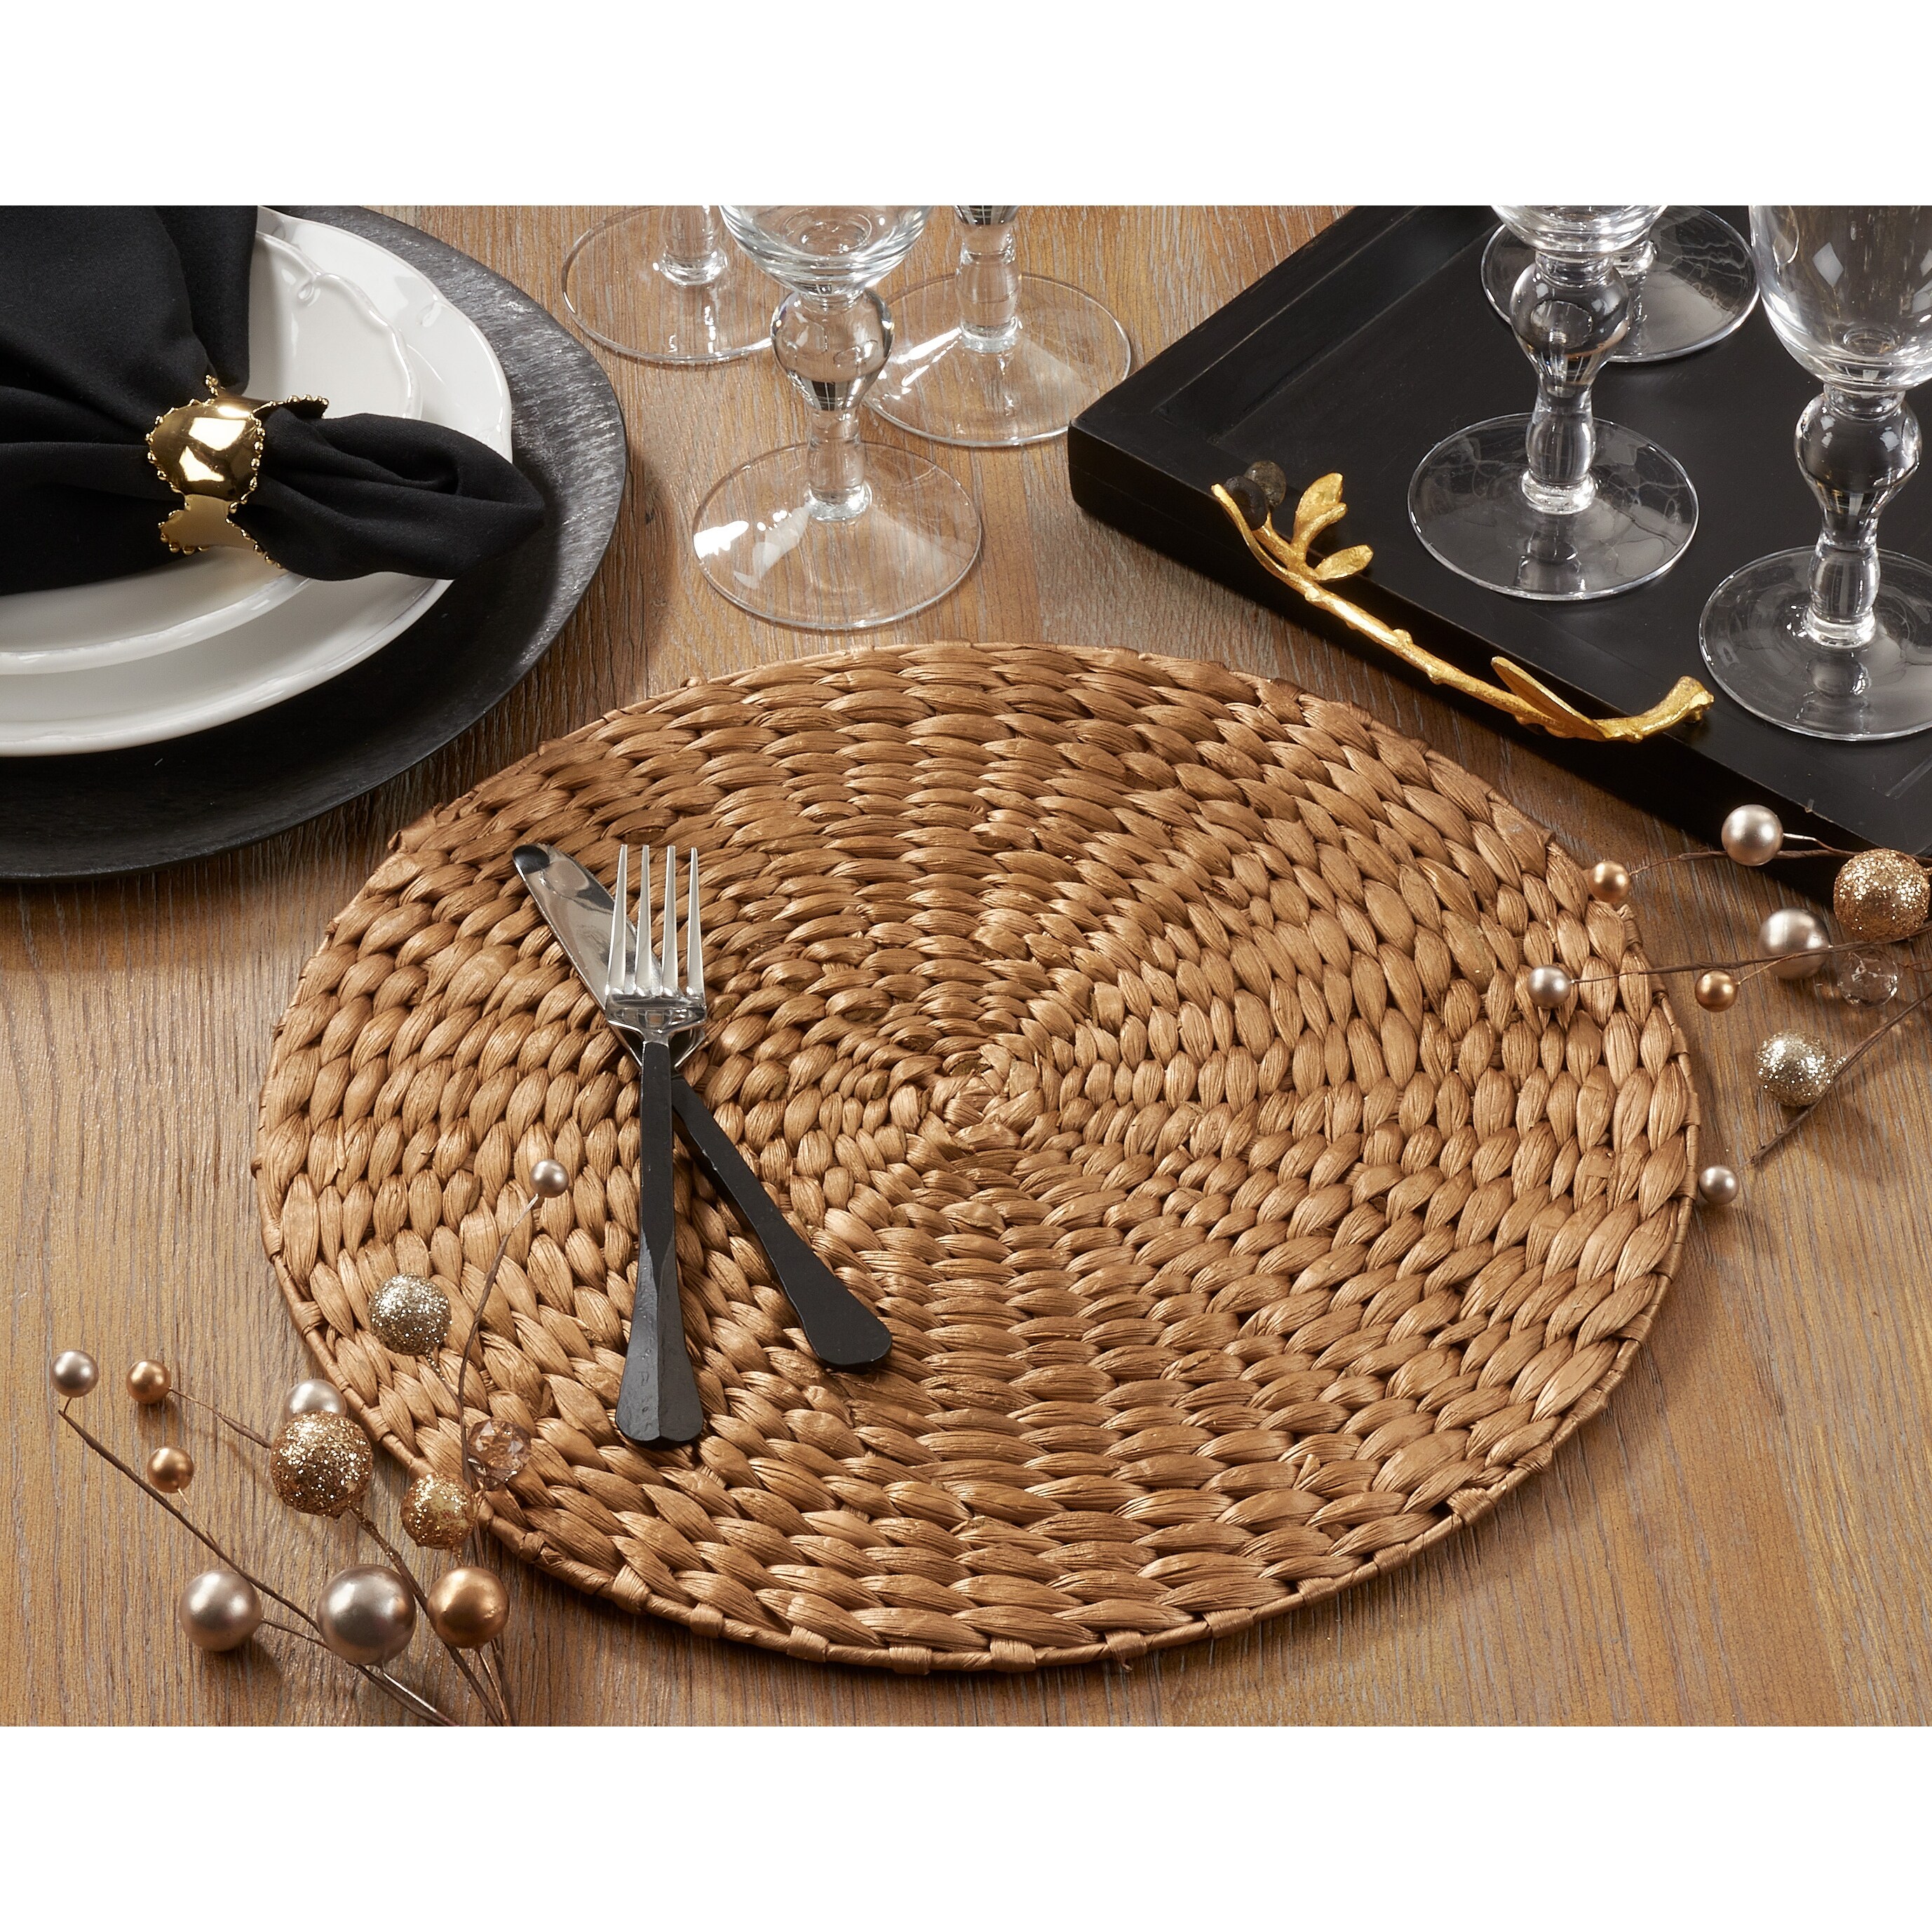 30cm COYMOS Woven Placemats Round Set of 4 Large Handmade Woven Placemats Heat Resistant Non-Slip 11.8 Inches Natural Water Hyacinth Weave Placemat for Dining Table 